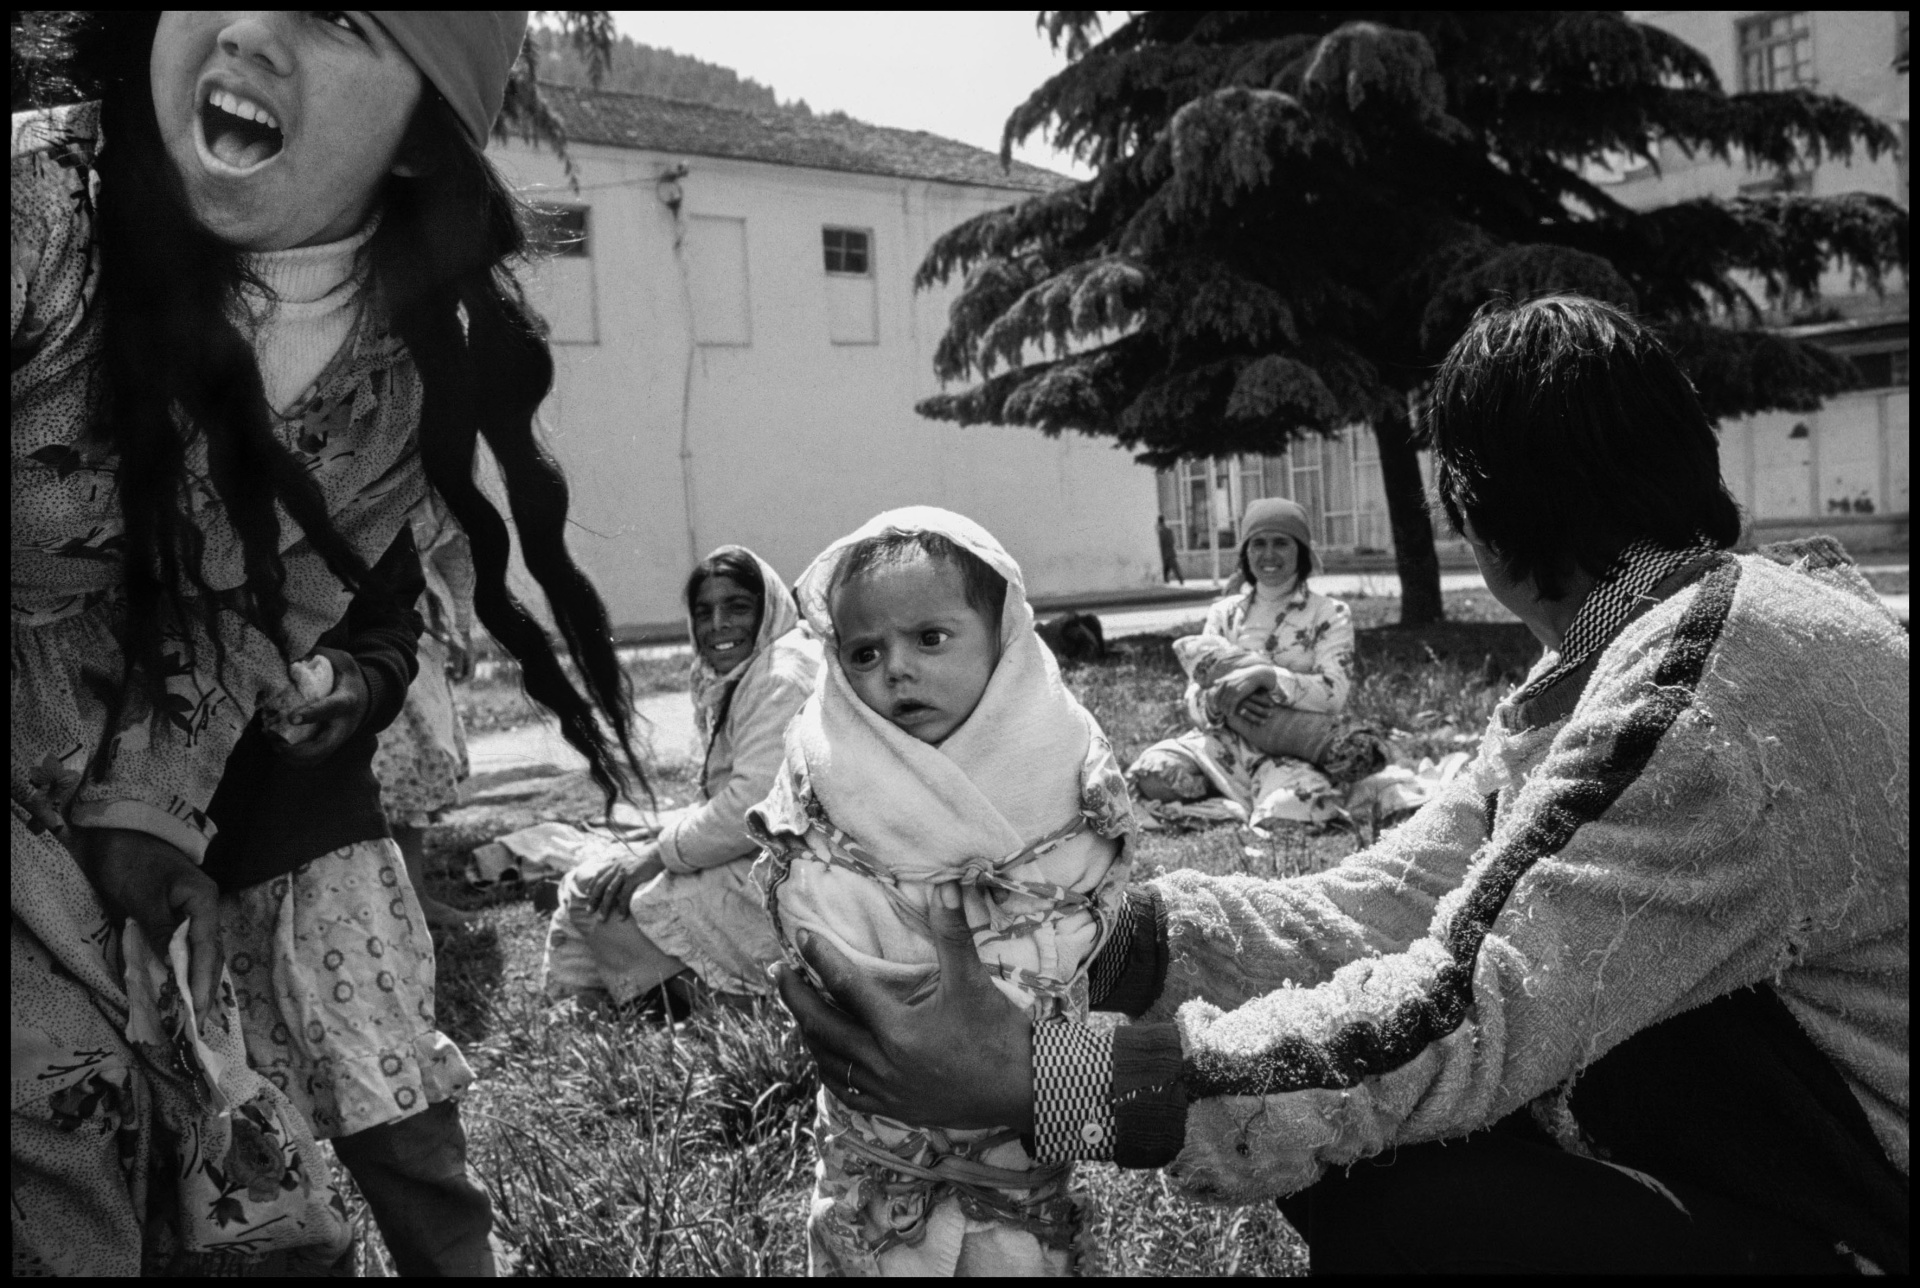 ALBANIA 1989  "Once upon a time there was Albania"   © Paolo Siccardi, © Paolo Siccardi - All rights reserved - Tutti i diritti sono riservati. siccardi.walkaboutph@gmail.com © Copyright 2020 - tutti i diritti sono riservati - all rights reserved. art. 70